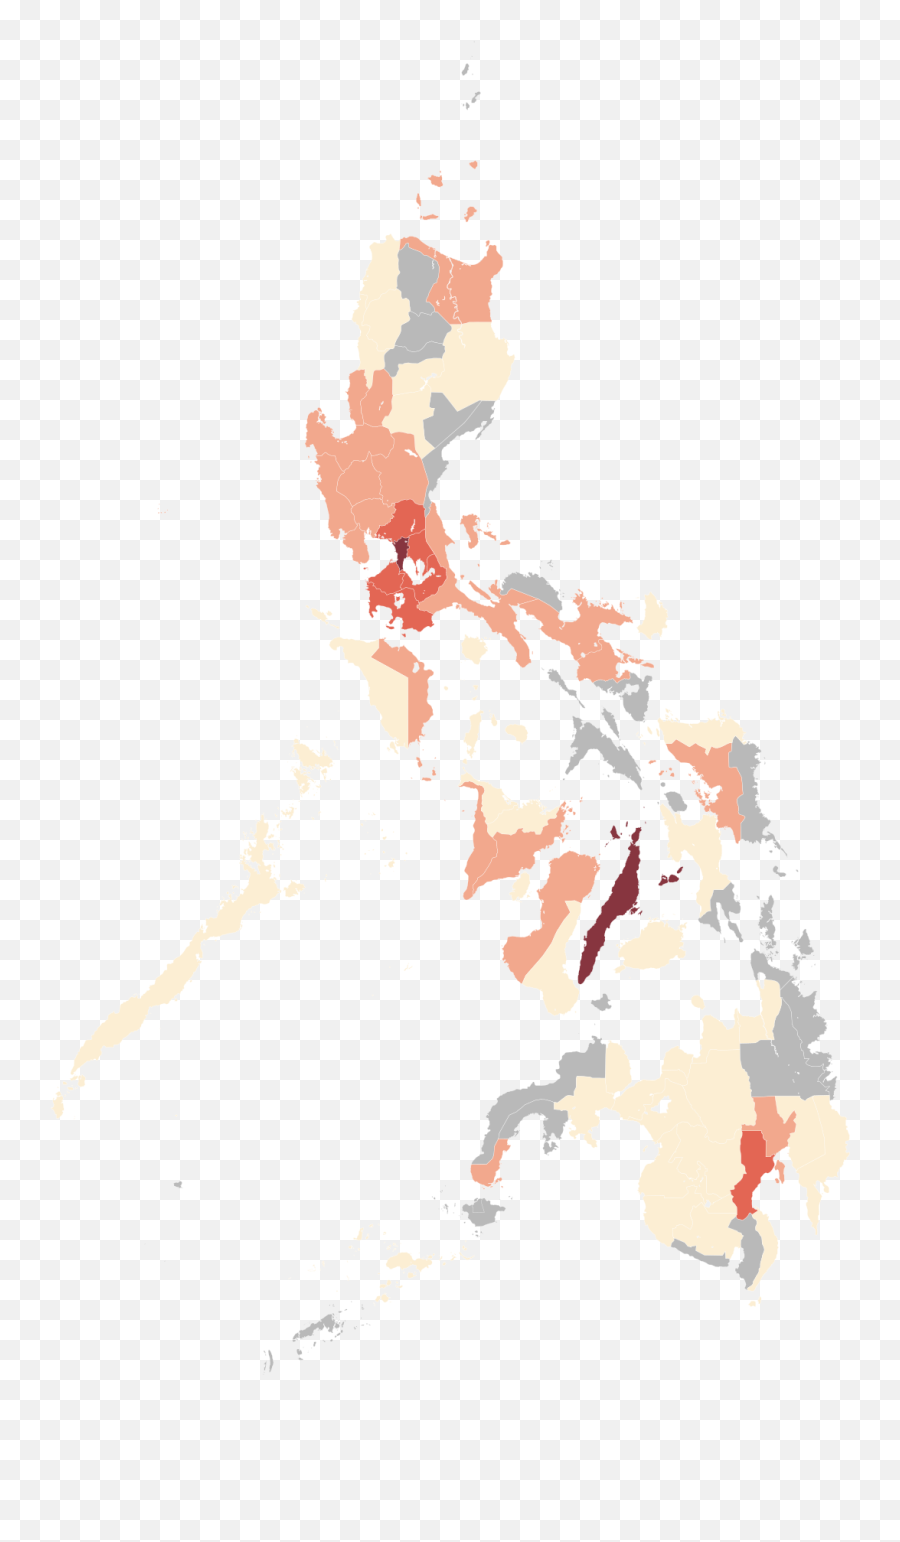 Download Vector Map Of The Philippines Png Transparent - Areas Under Gcq,United States Map Transparent Background